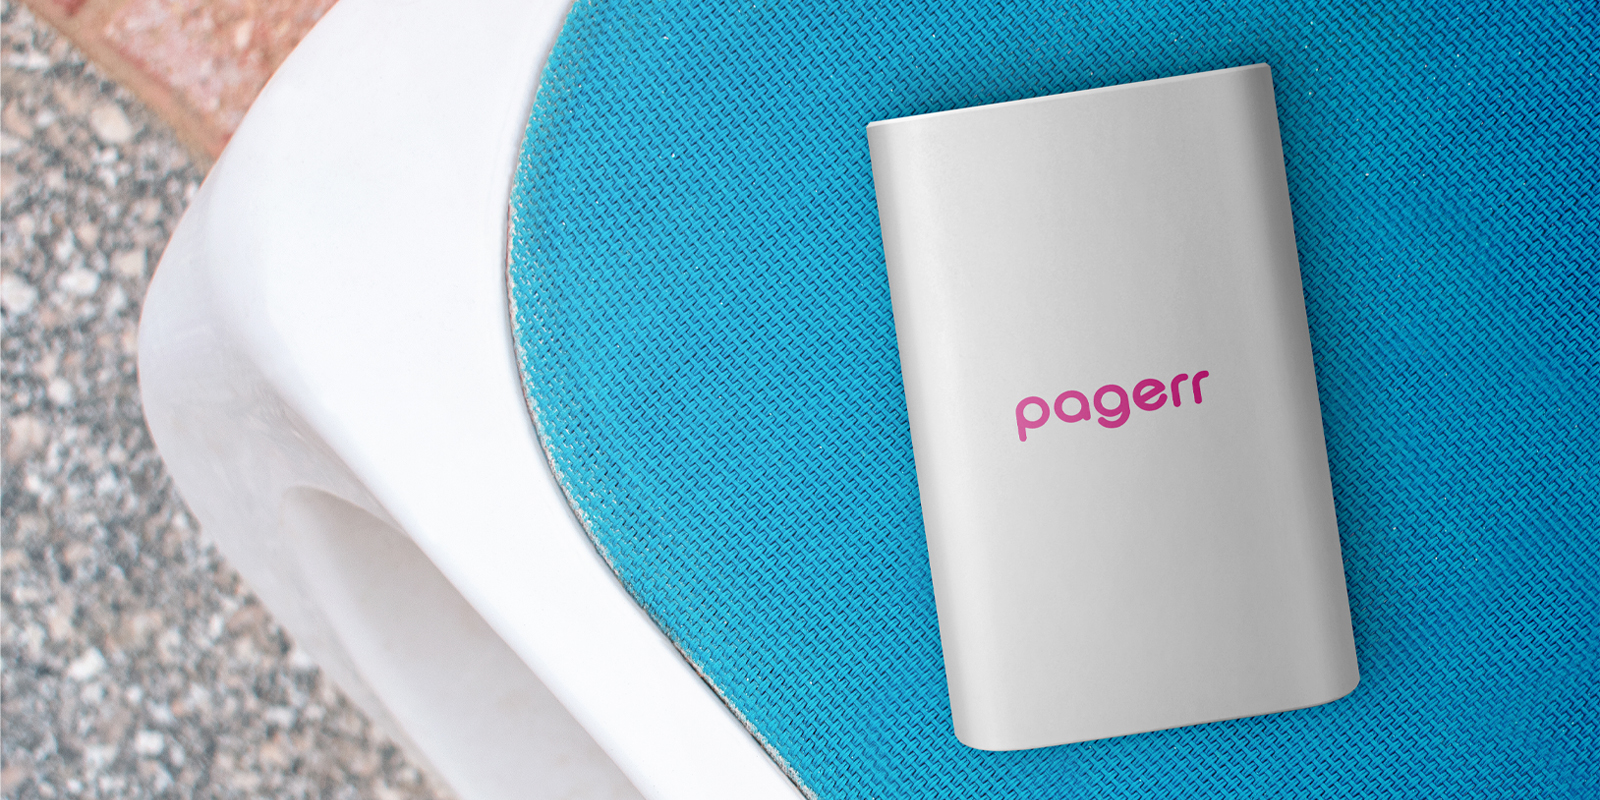 Chargers & power banks in Bucharest - Print with Pagerr